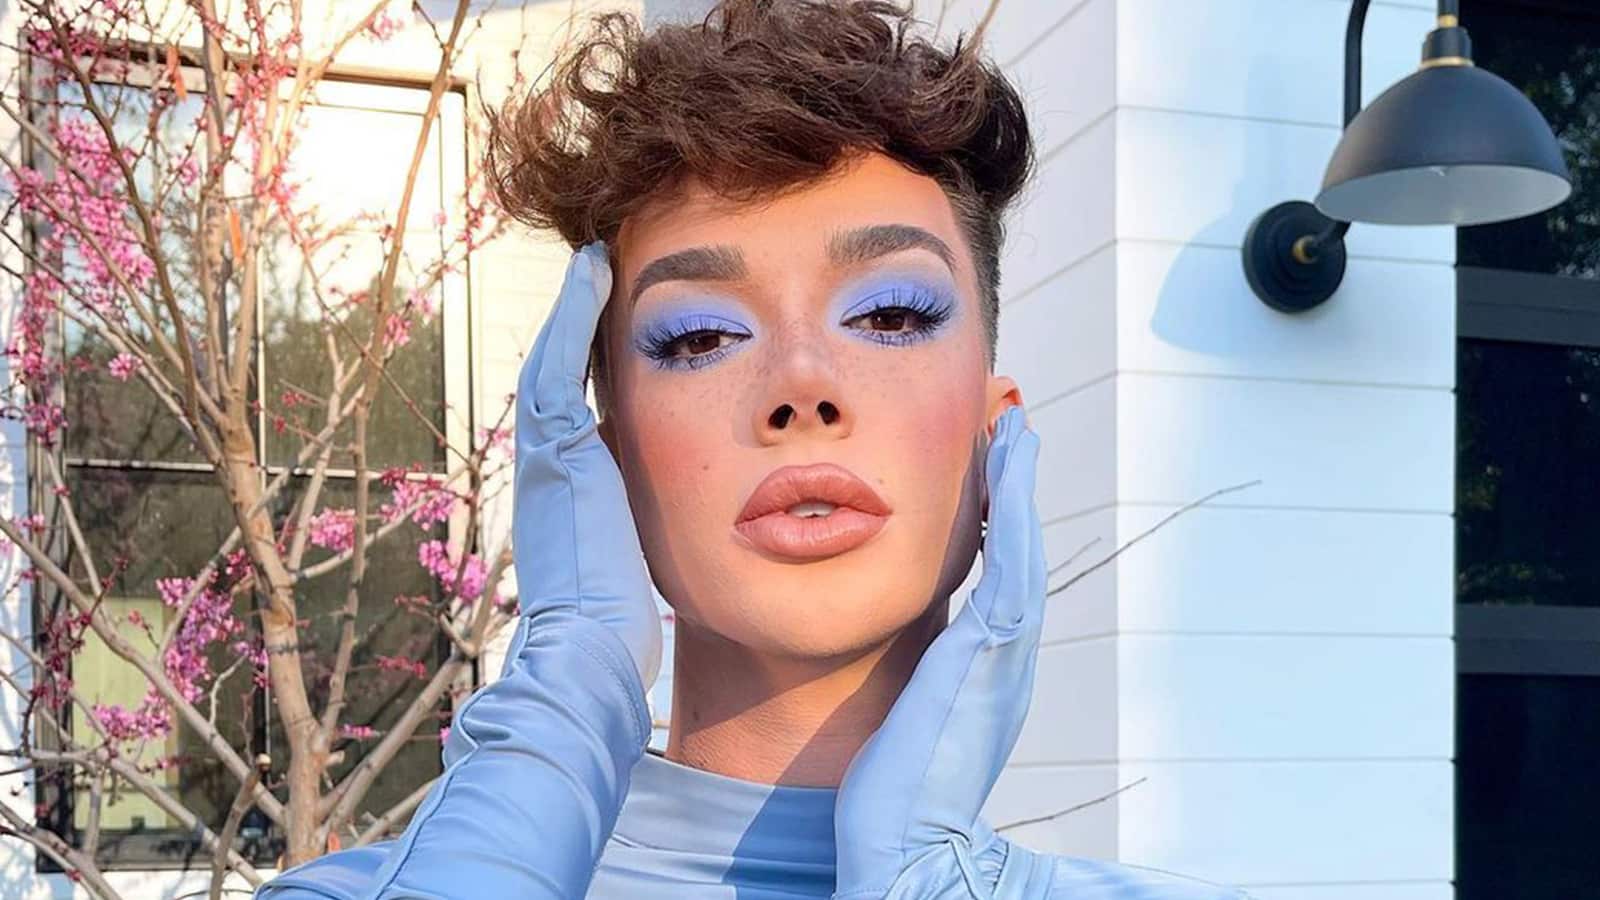 James Charles faces further accusations of flirting with underage teen ...